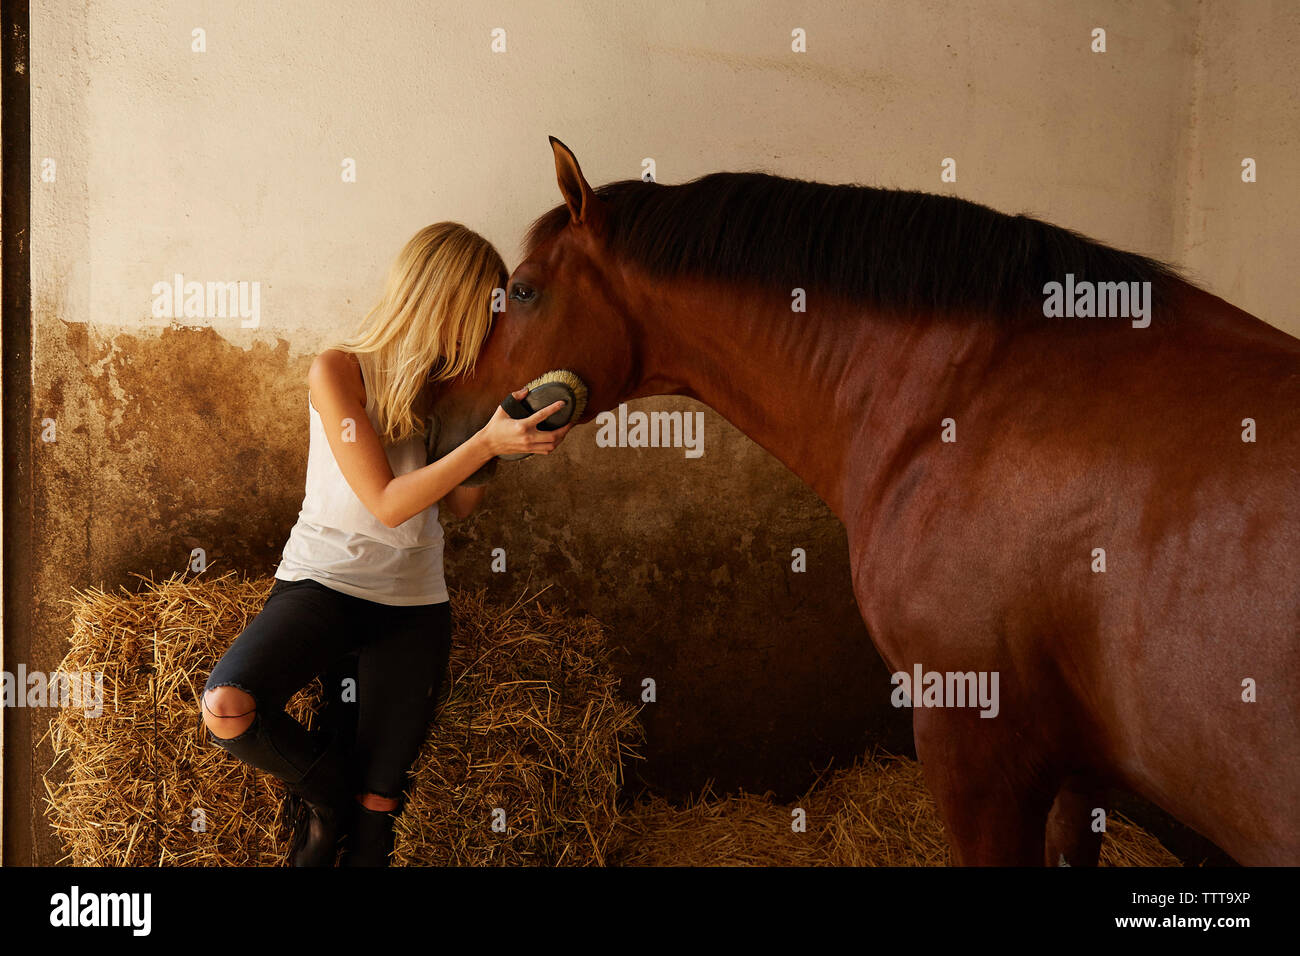 Woman brushing horse stable en Banque D'Images